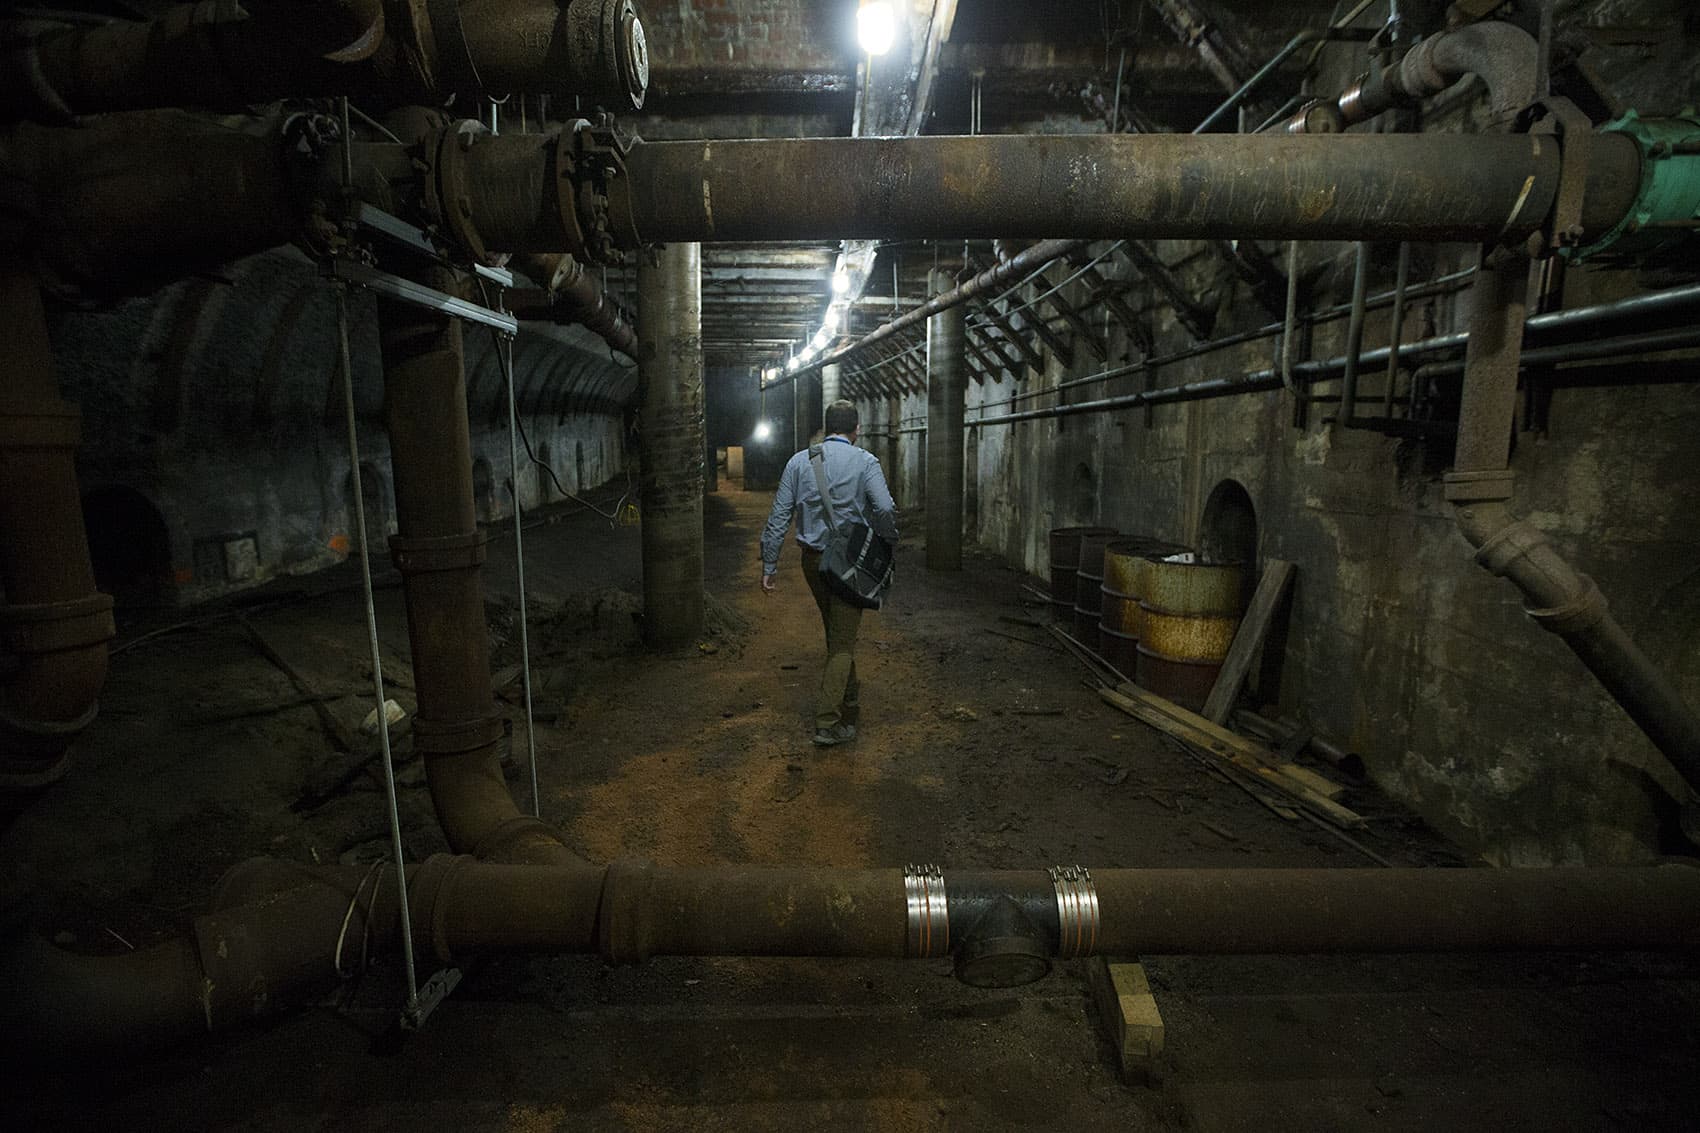 City of Boston archaeologist Joe Bagley walks through the first of two sections of an old MBTA tunnel, which traveled between Scollay Square and Adams Square, and is believed to have been shut down in 1963. (Jesse Costa/WBUR)